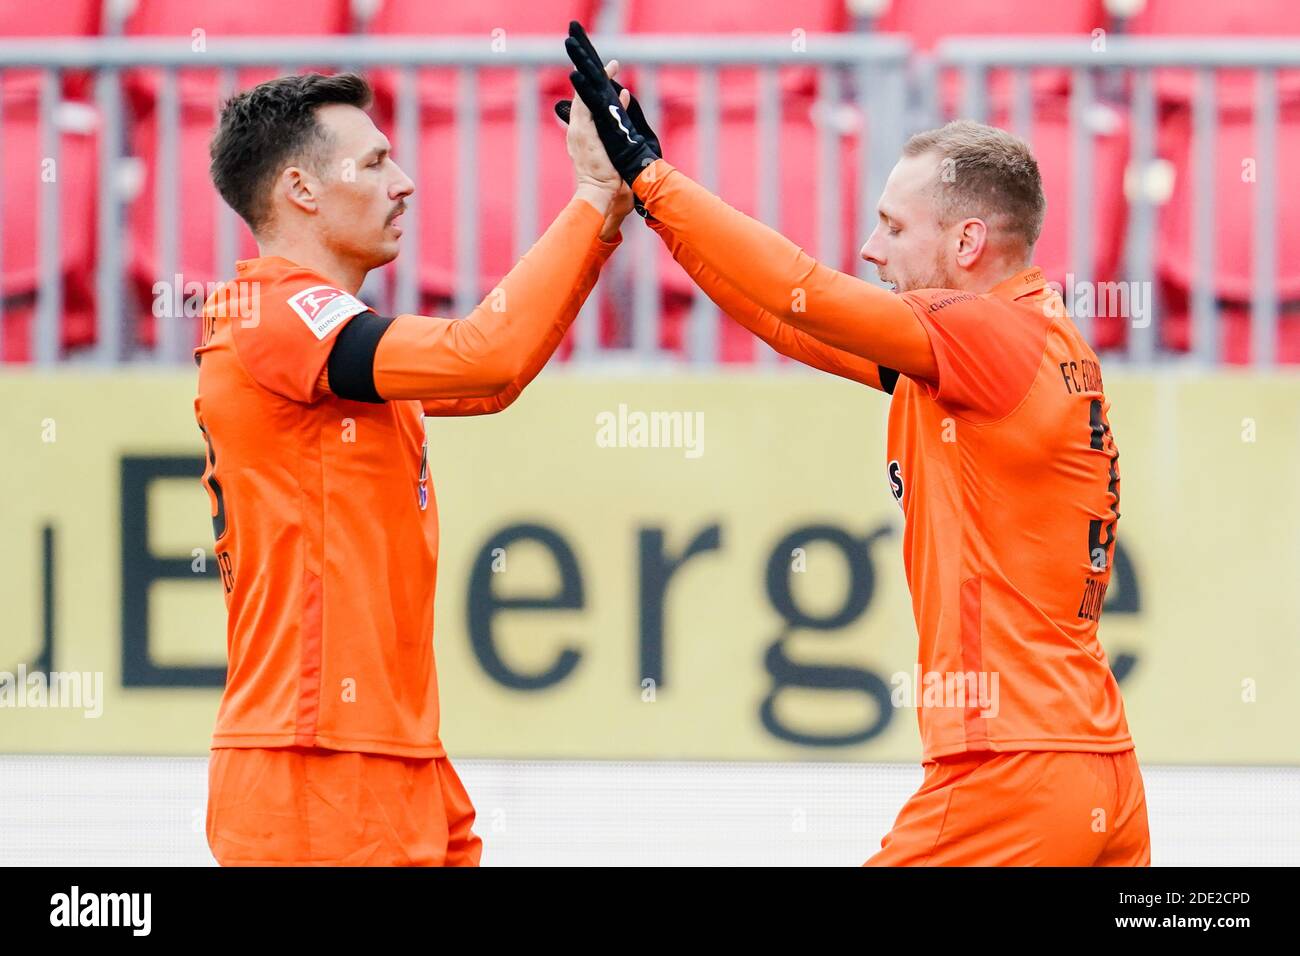 Sandhausen, Germany. 28th Nov, 2020. Football: 2nd Bundesliga, SV Sandhausen - FC Erzgebirge Aue, 9th matchday, Hardtwaldstadion. Goal scorer Ben Zolinski (r) from Erzgebirge Aue cheers with Sören Gonther from Erzgebirge Aue about the goal for the 1:2. Credit: Uwe Anspach/dpa - IMPORTANT NOTE: In accordance with the regulations of the DFL Deutsche Fußball Liga and the DFB Deutscher Fußball-Bund, it is prohibited to exploit or have exploited in the stadium and/or from the game taken photographs in the form of sequence images and/or video-like photo series./dpa/Alamy Live News Stock Photo